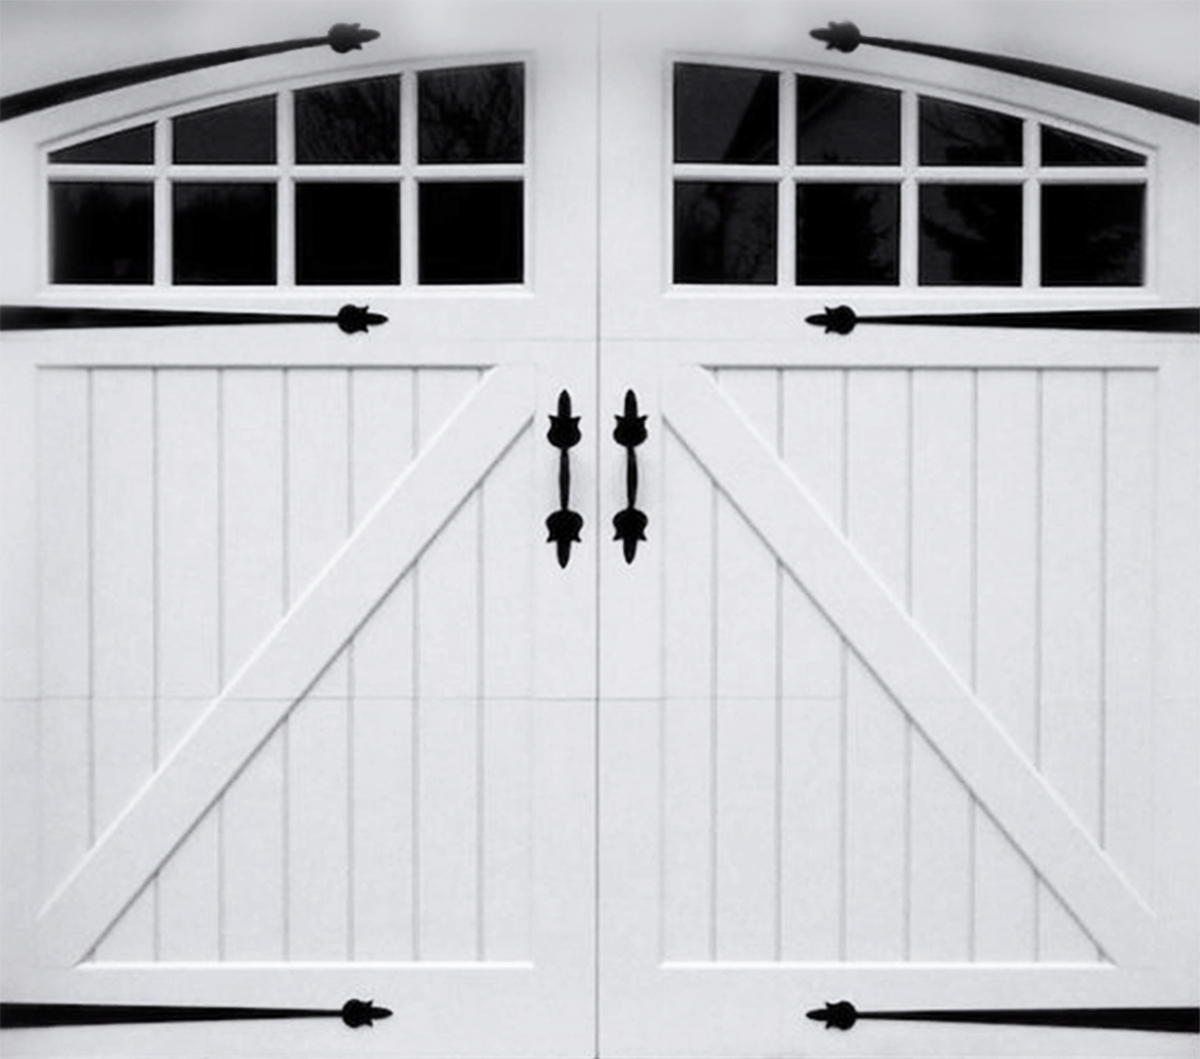 A single door with correct decorative hardware placements.